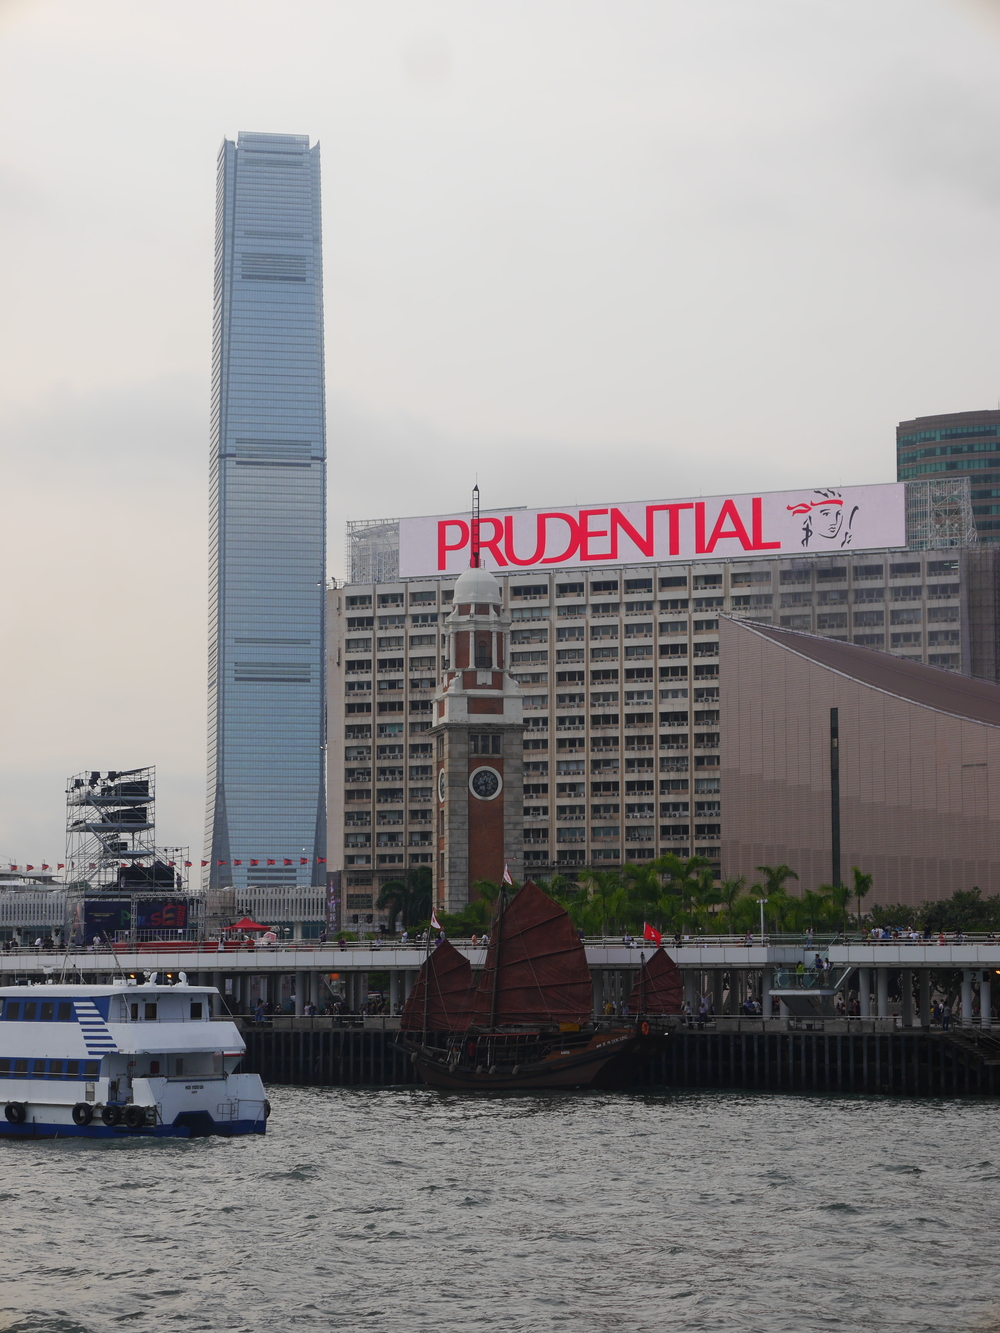  The tallest building in Hong Kong, the  International Commerce Centre  on the left with the  Tsim Tsa Tsui clock tower  in front (used to be a part of a rail terminal). 